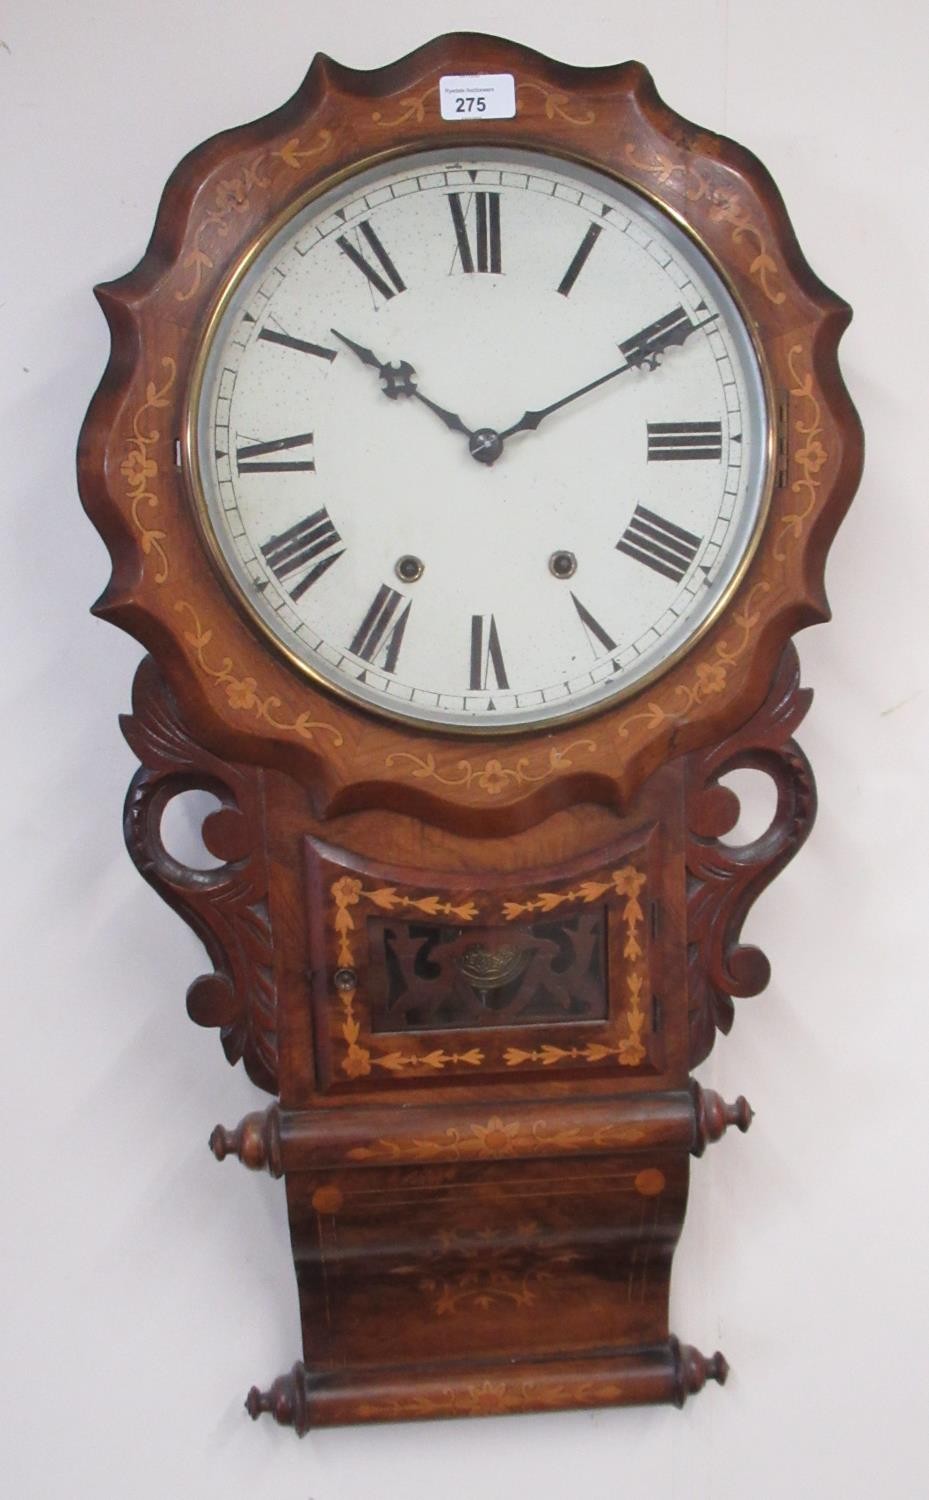 Jerome & Co. - Superior 8 day Anglo-American clocks, early C20th inlaid and figured walnut drop dial